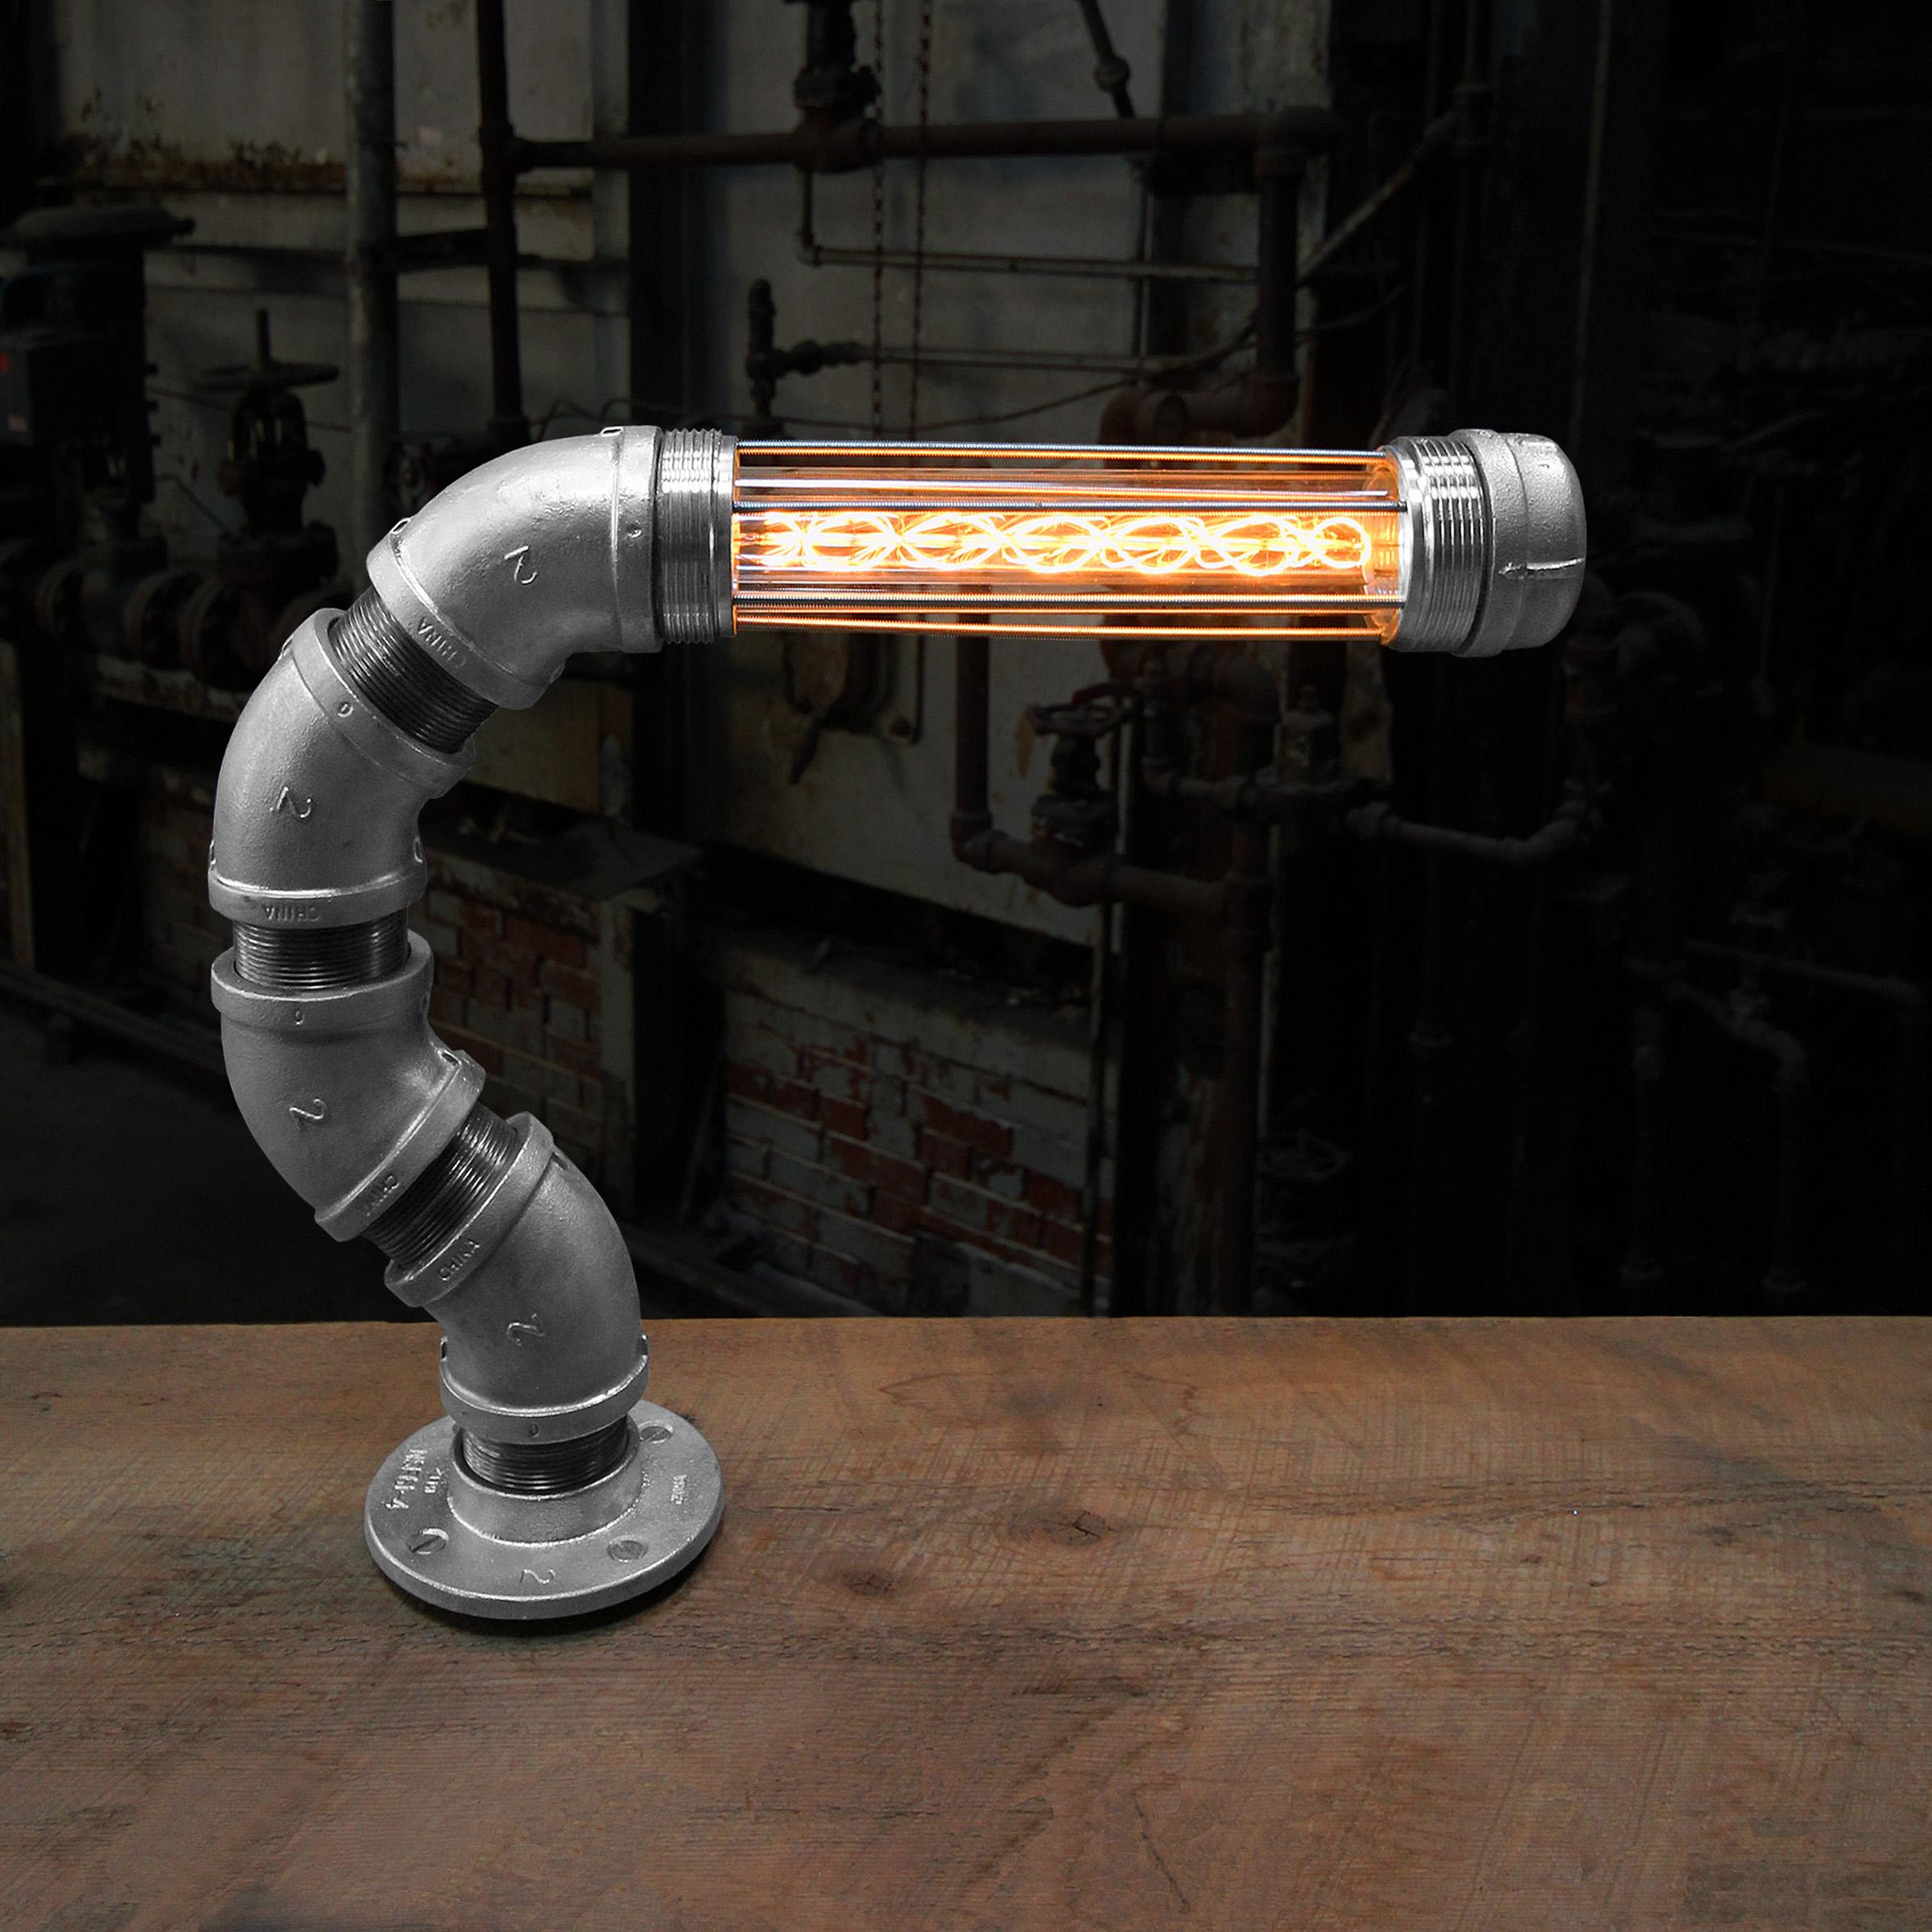 The Firefly modern industrial table lamp boasts a refined and organic shape with a perfectly balanced and cantilevered proprietary industrial light Module which creates a warm and moody glow to illuminate your favorite industrial style desk or side